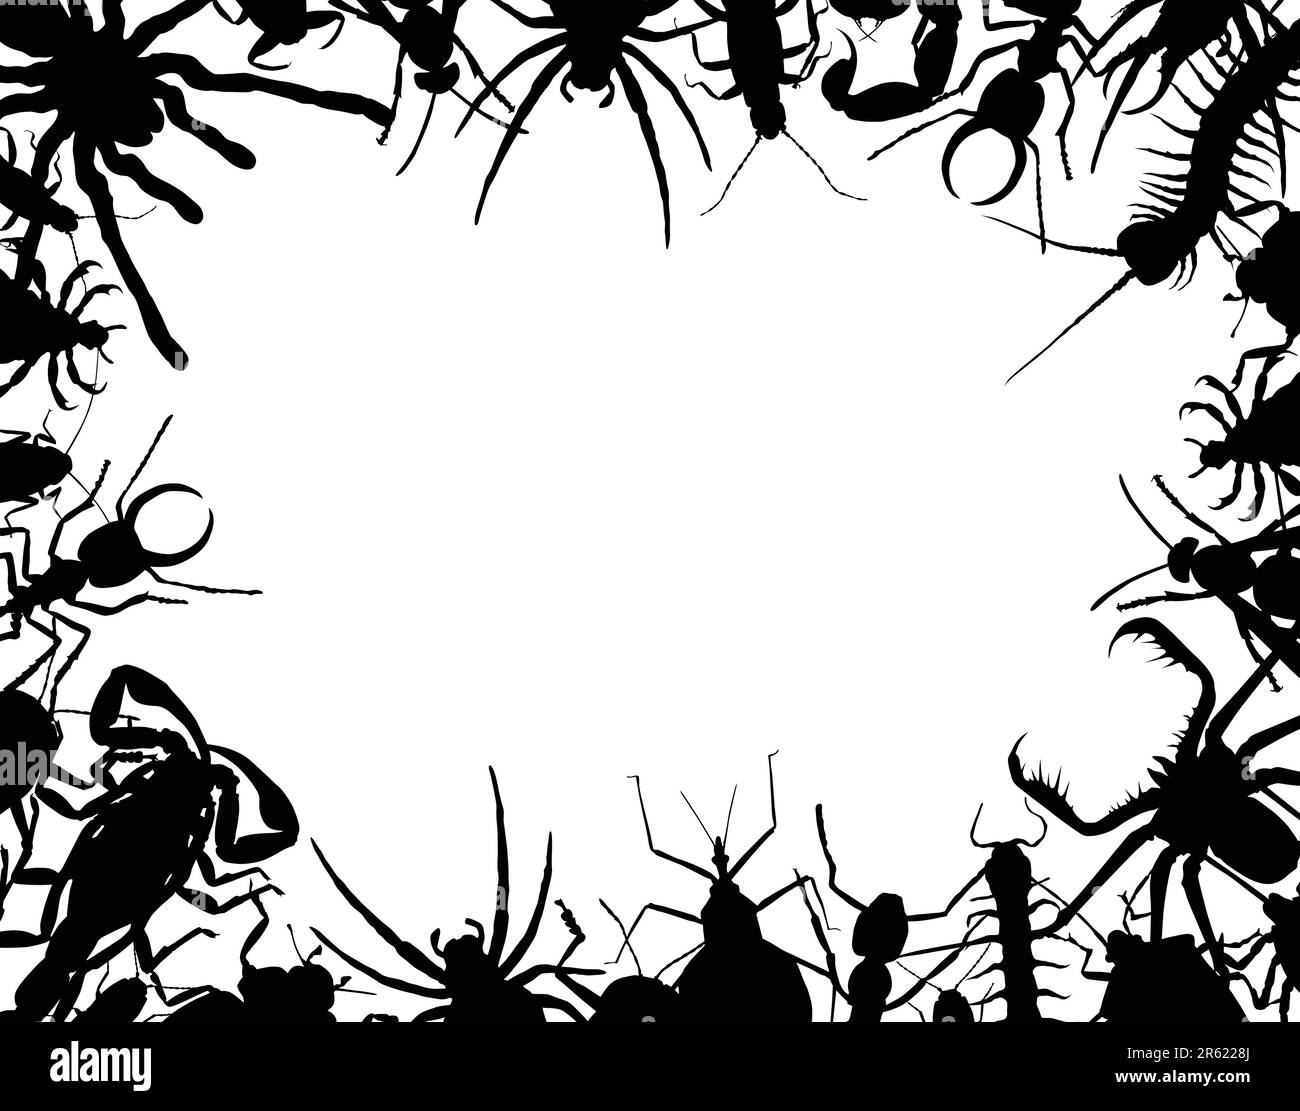 Border frame of editable vector outlines of insects and other invertebrates Stock Vector